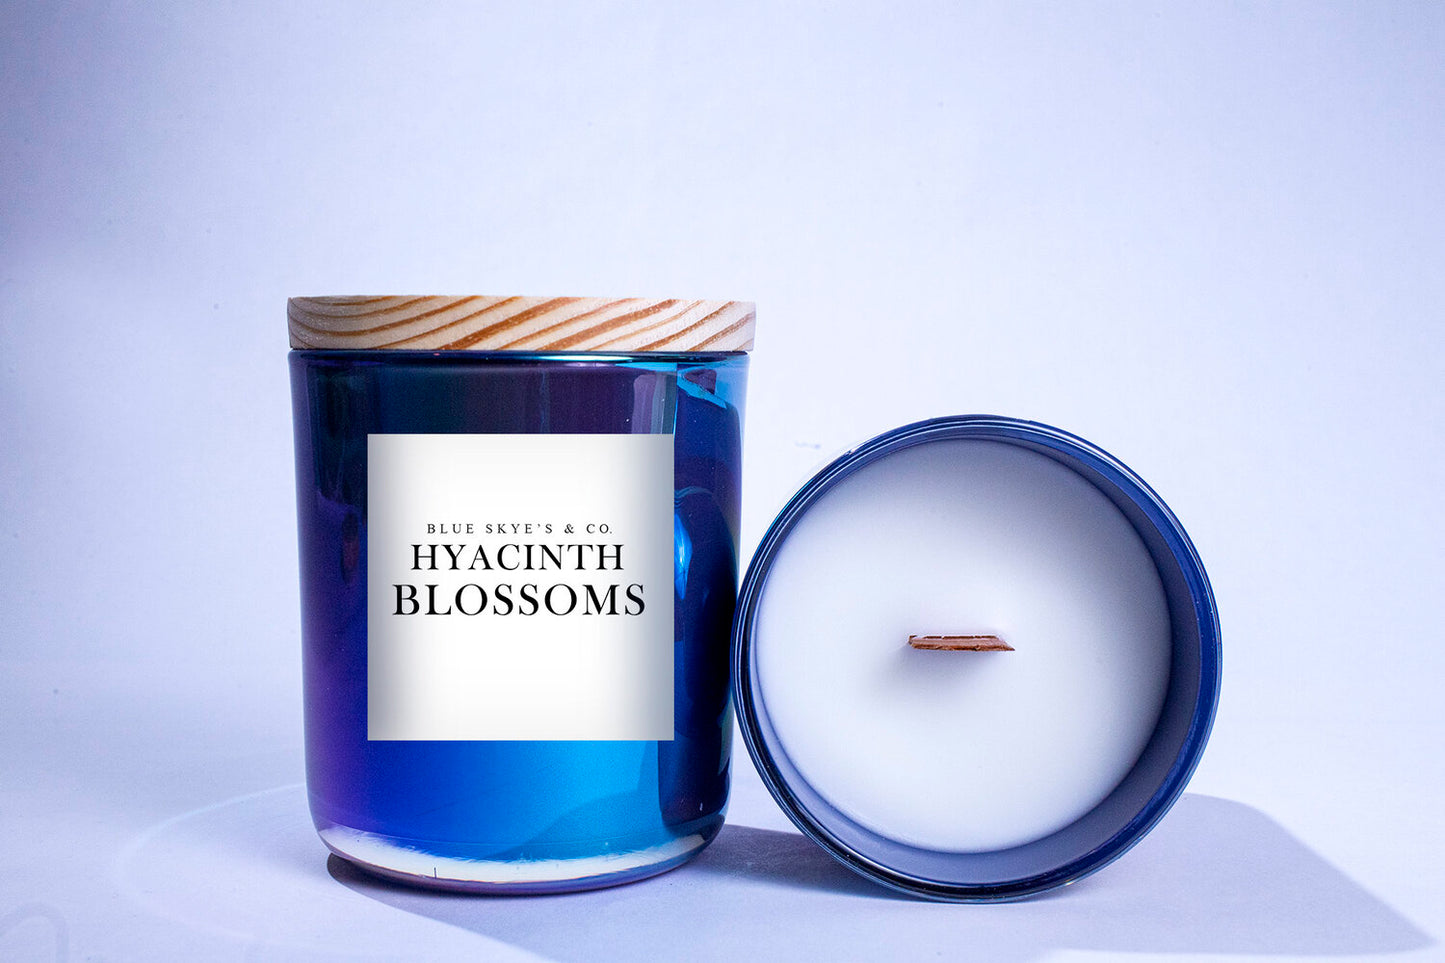 Blue Skye's & Co. | Hyacinth Blossoms Soy Candle